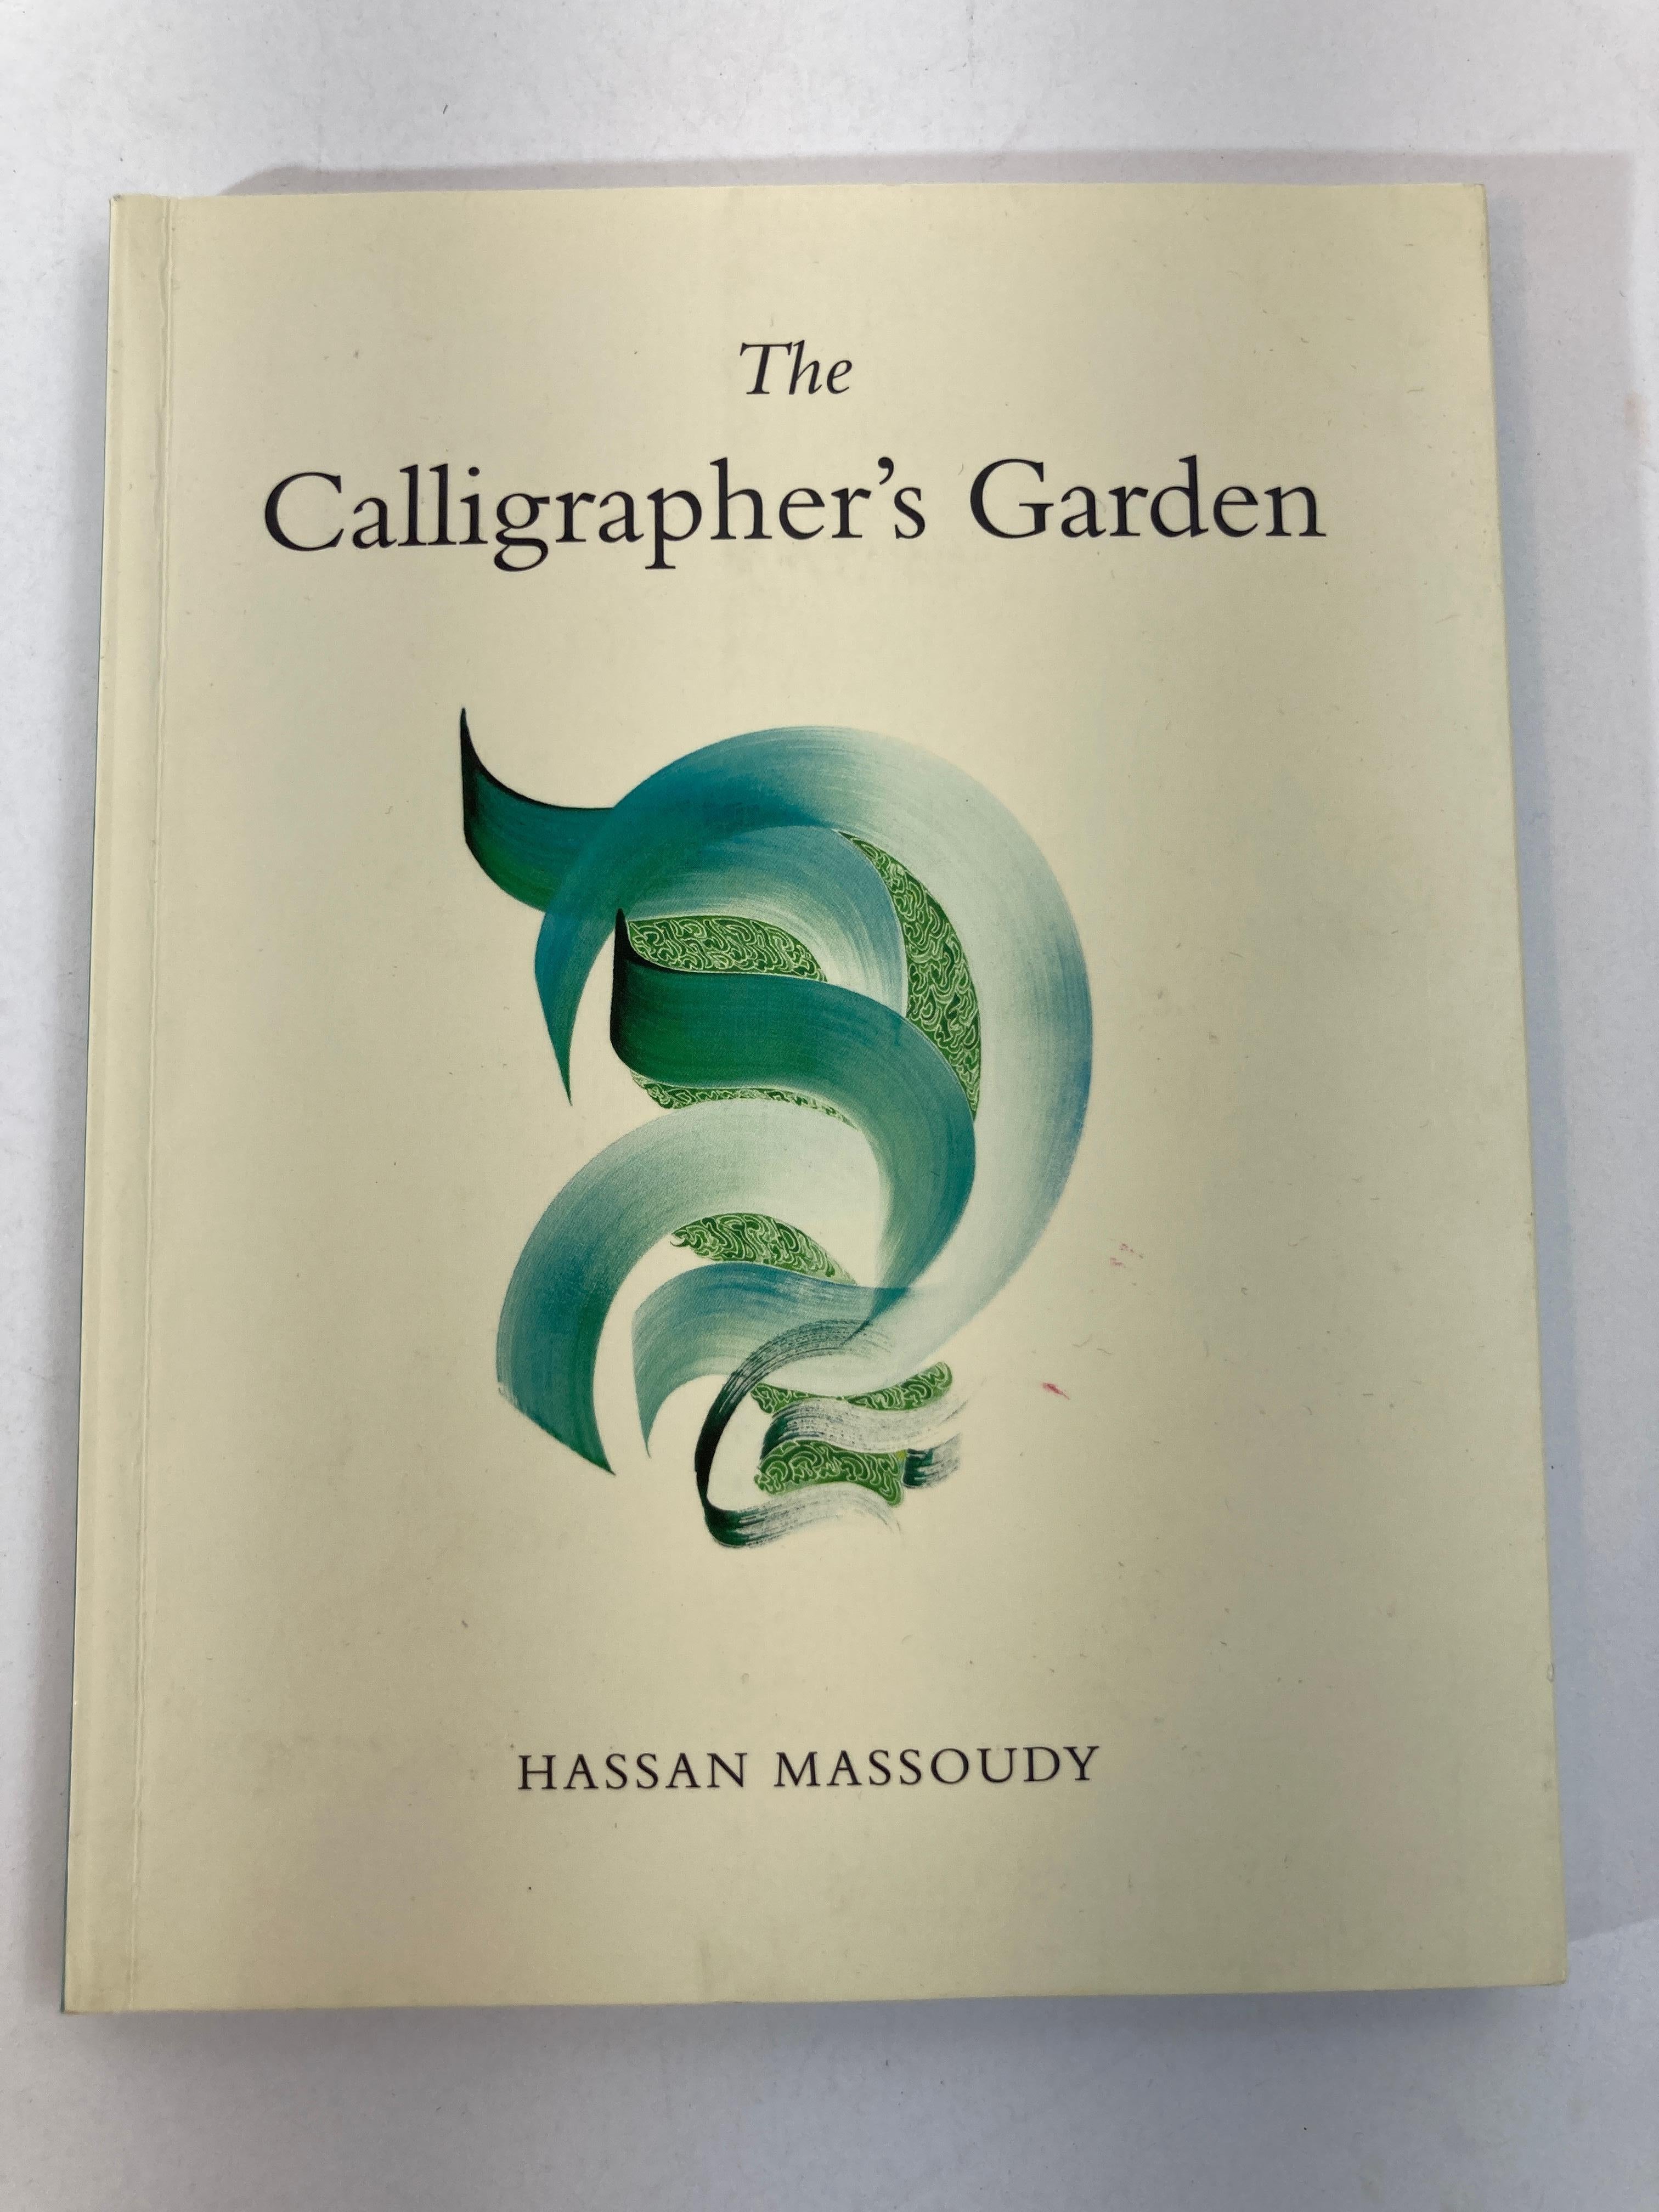 The Calligrapher's Garden by Hassan Massoudy Book
“A feast for the eyes and balm for the soul.”
